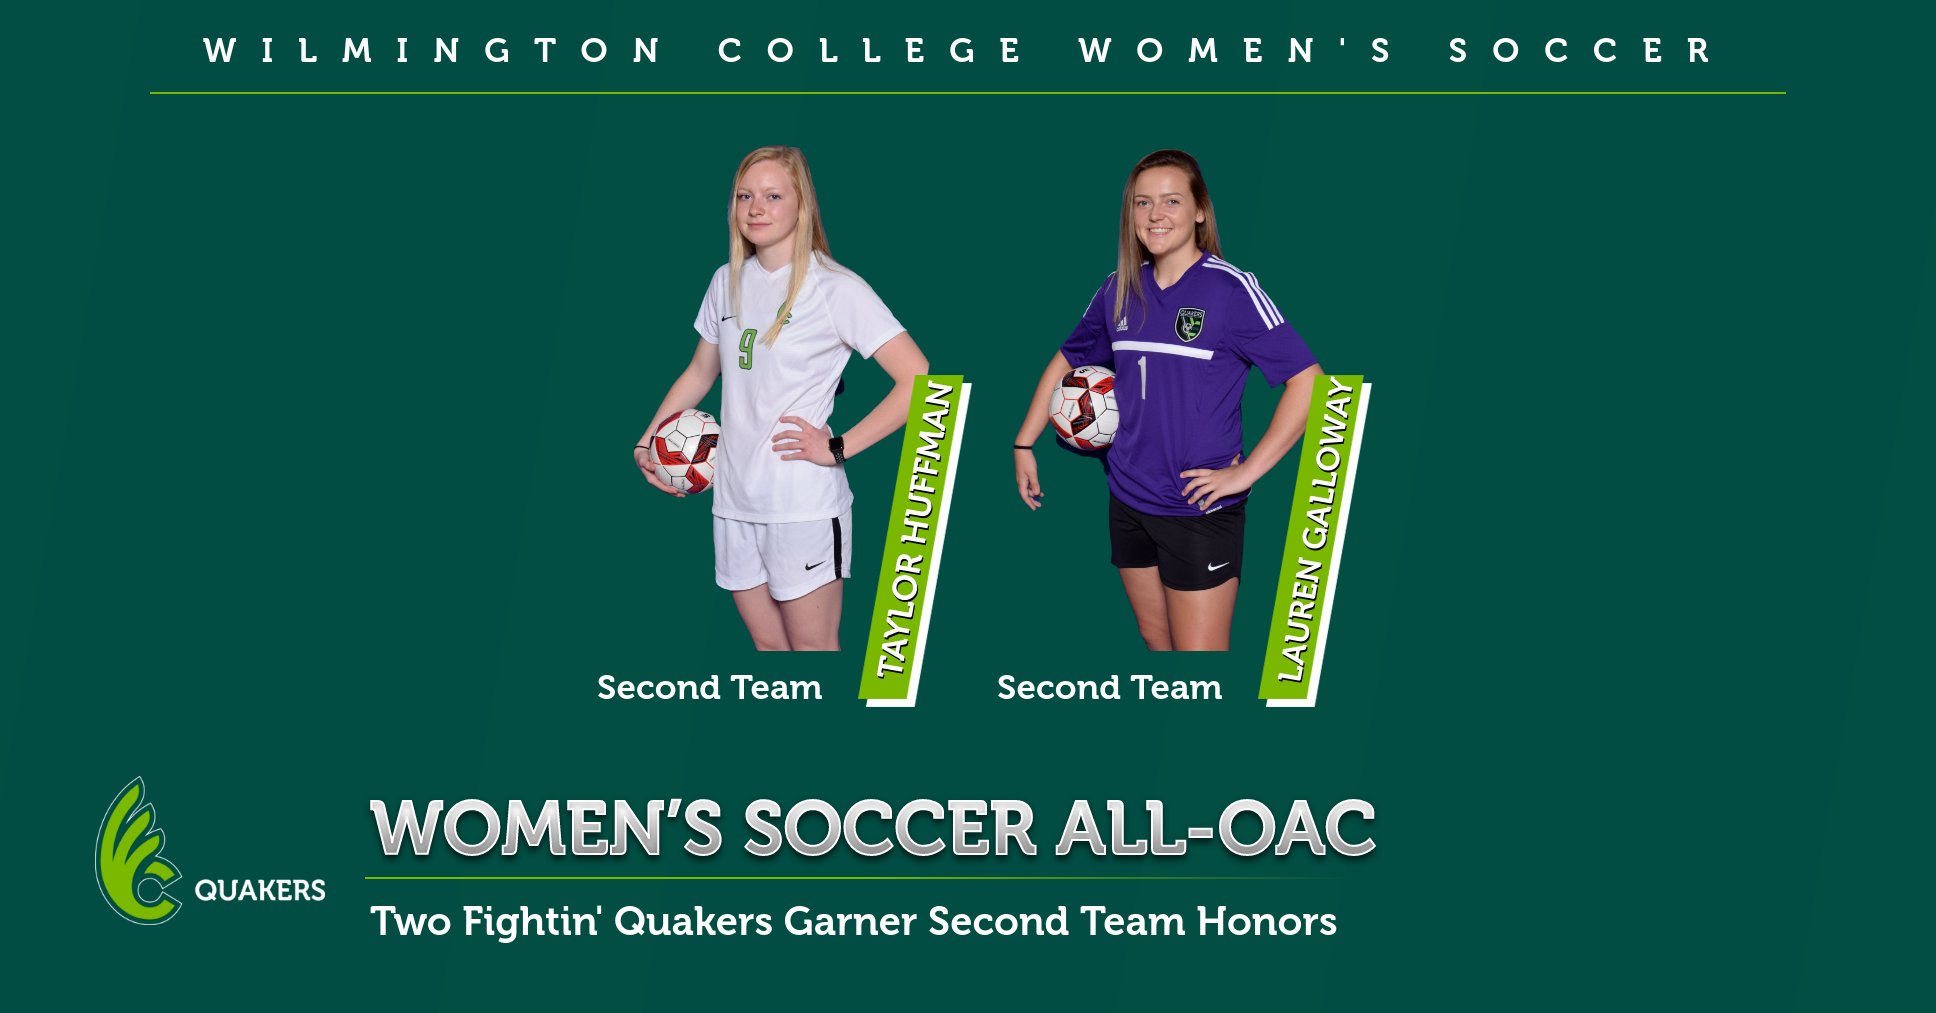 Huffman and Galloway Earn All-OAC Recognition